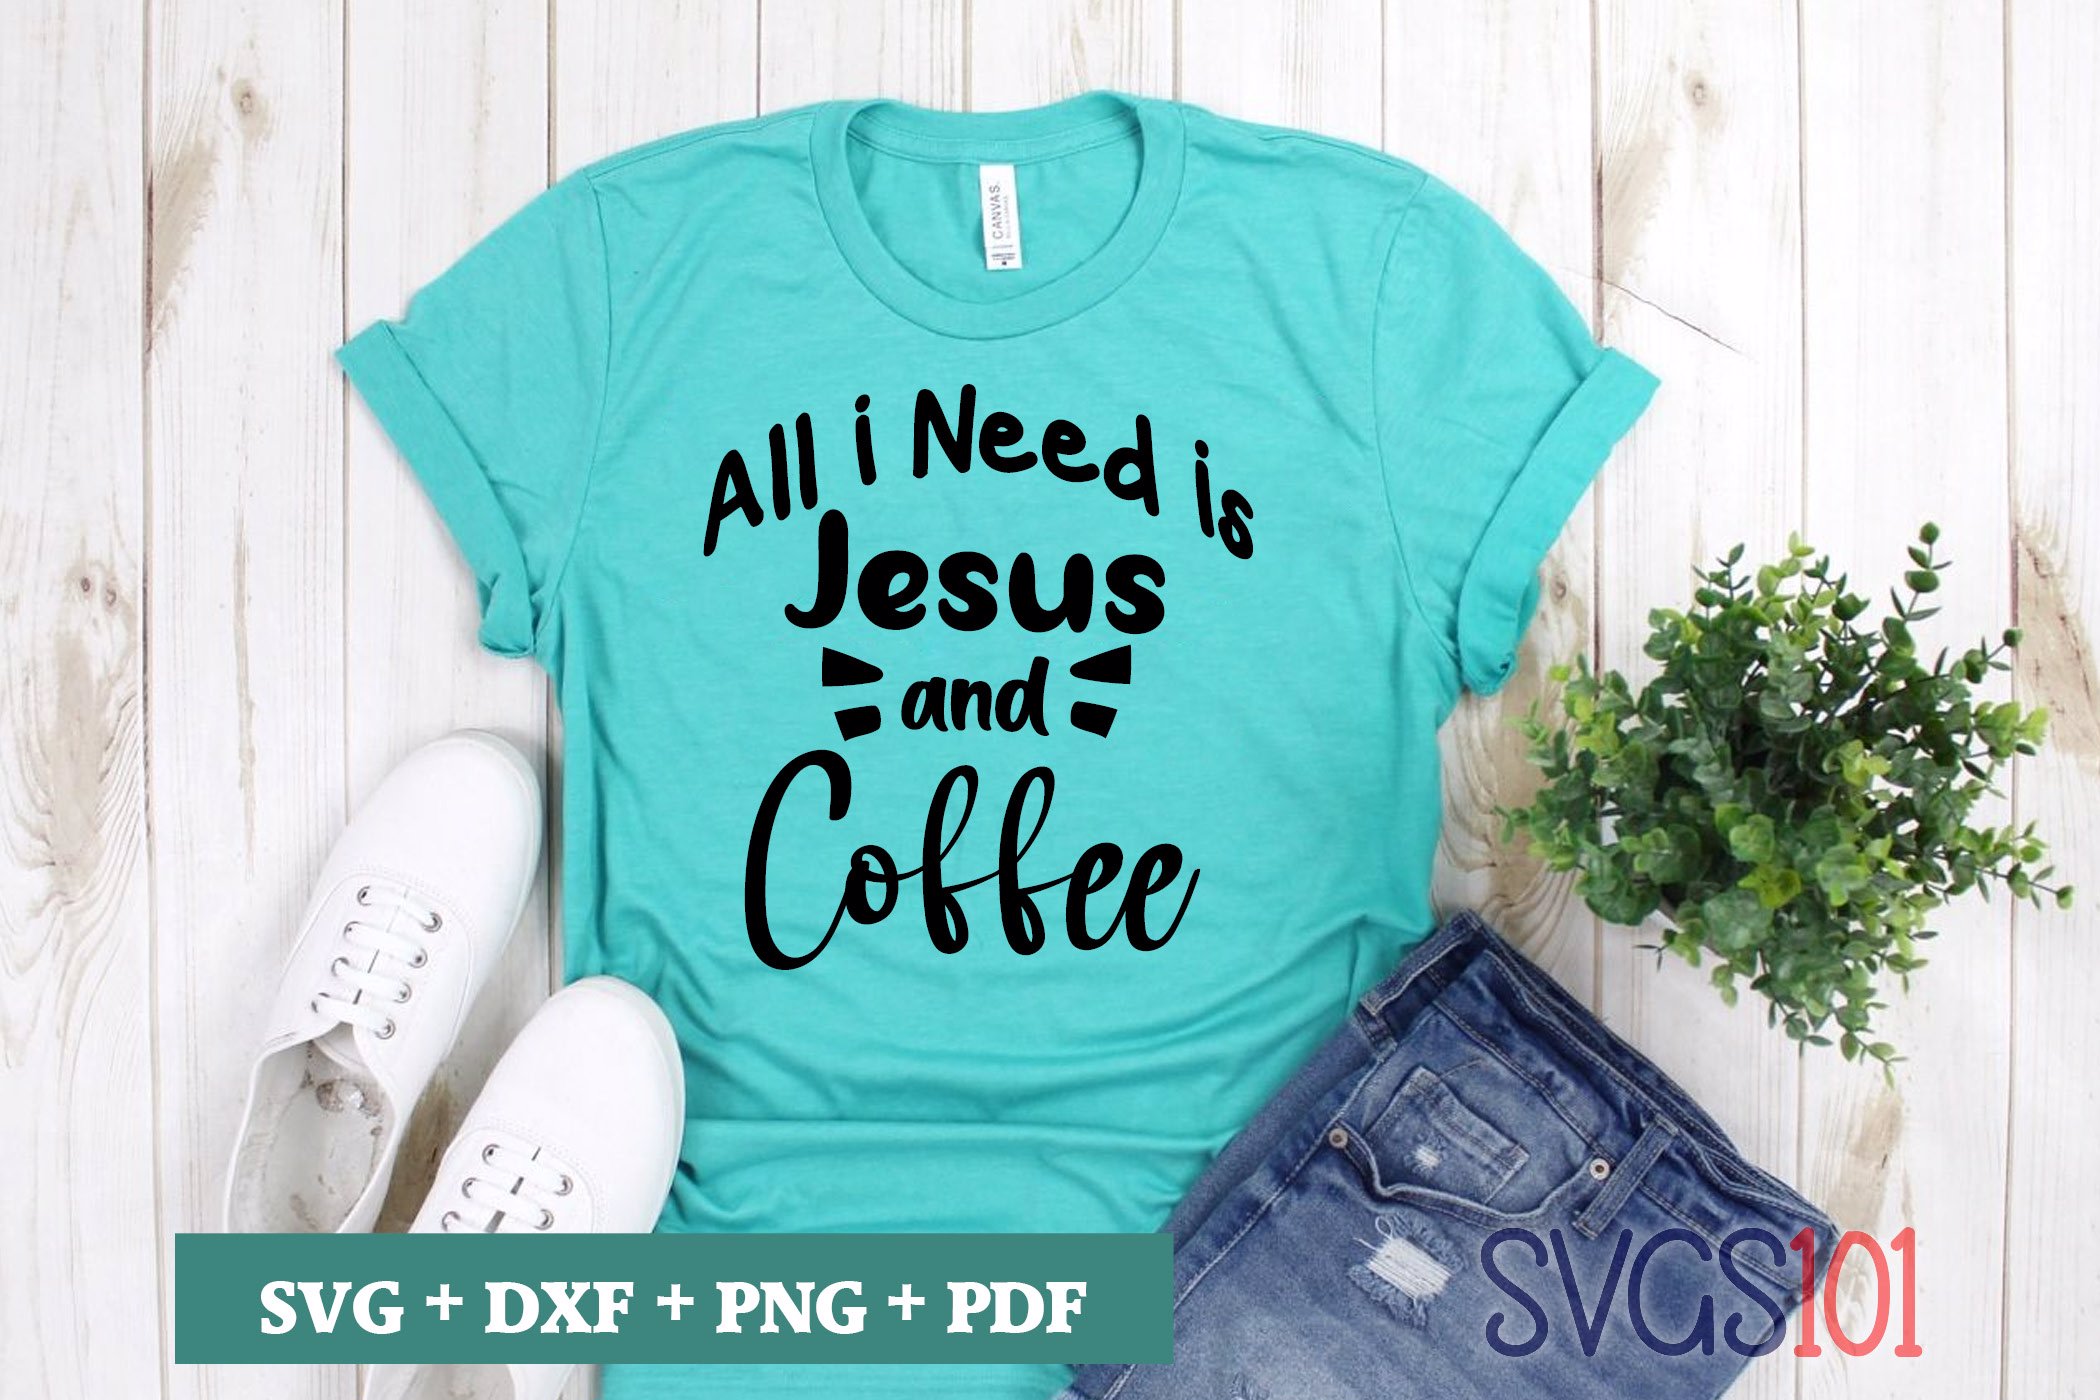 All I Need Is Jesus And Coffee SVG Cuttable file - DXF, EPS, PNG, PDF ...